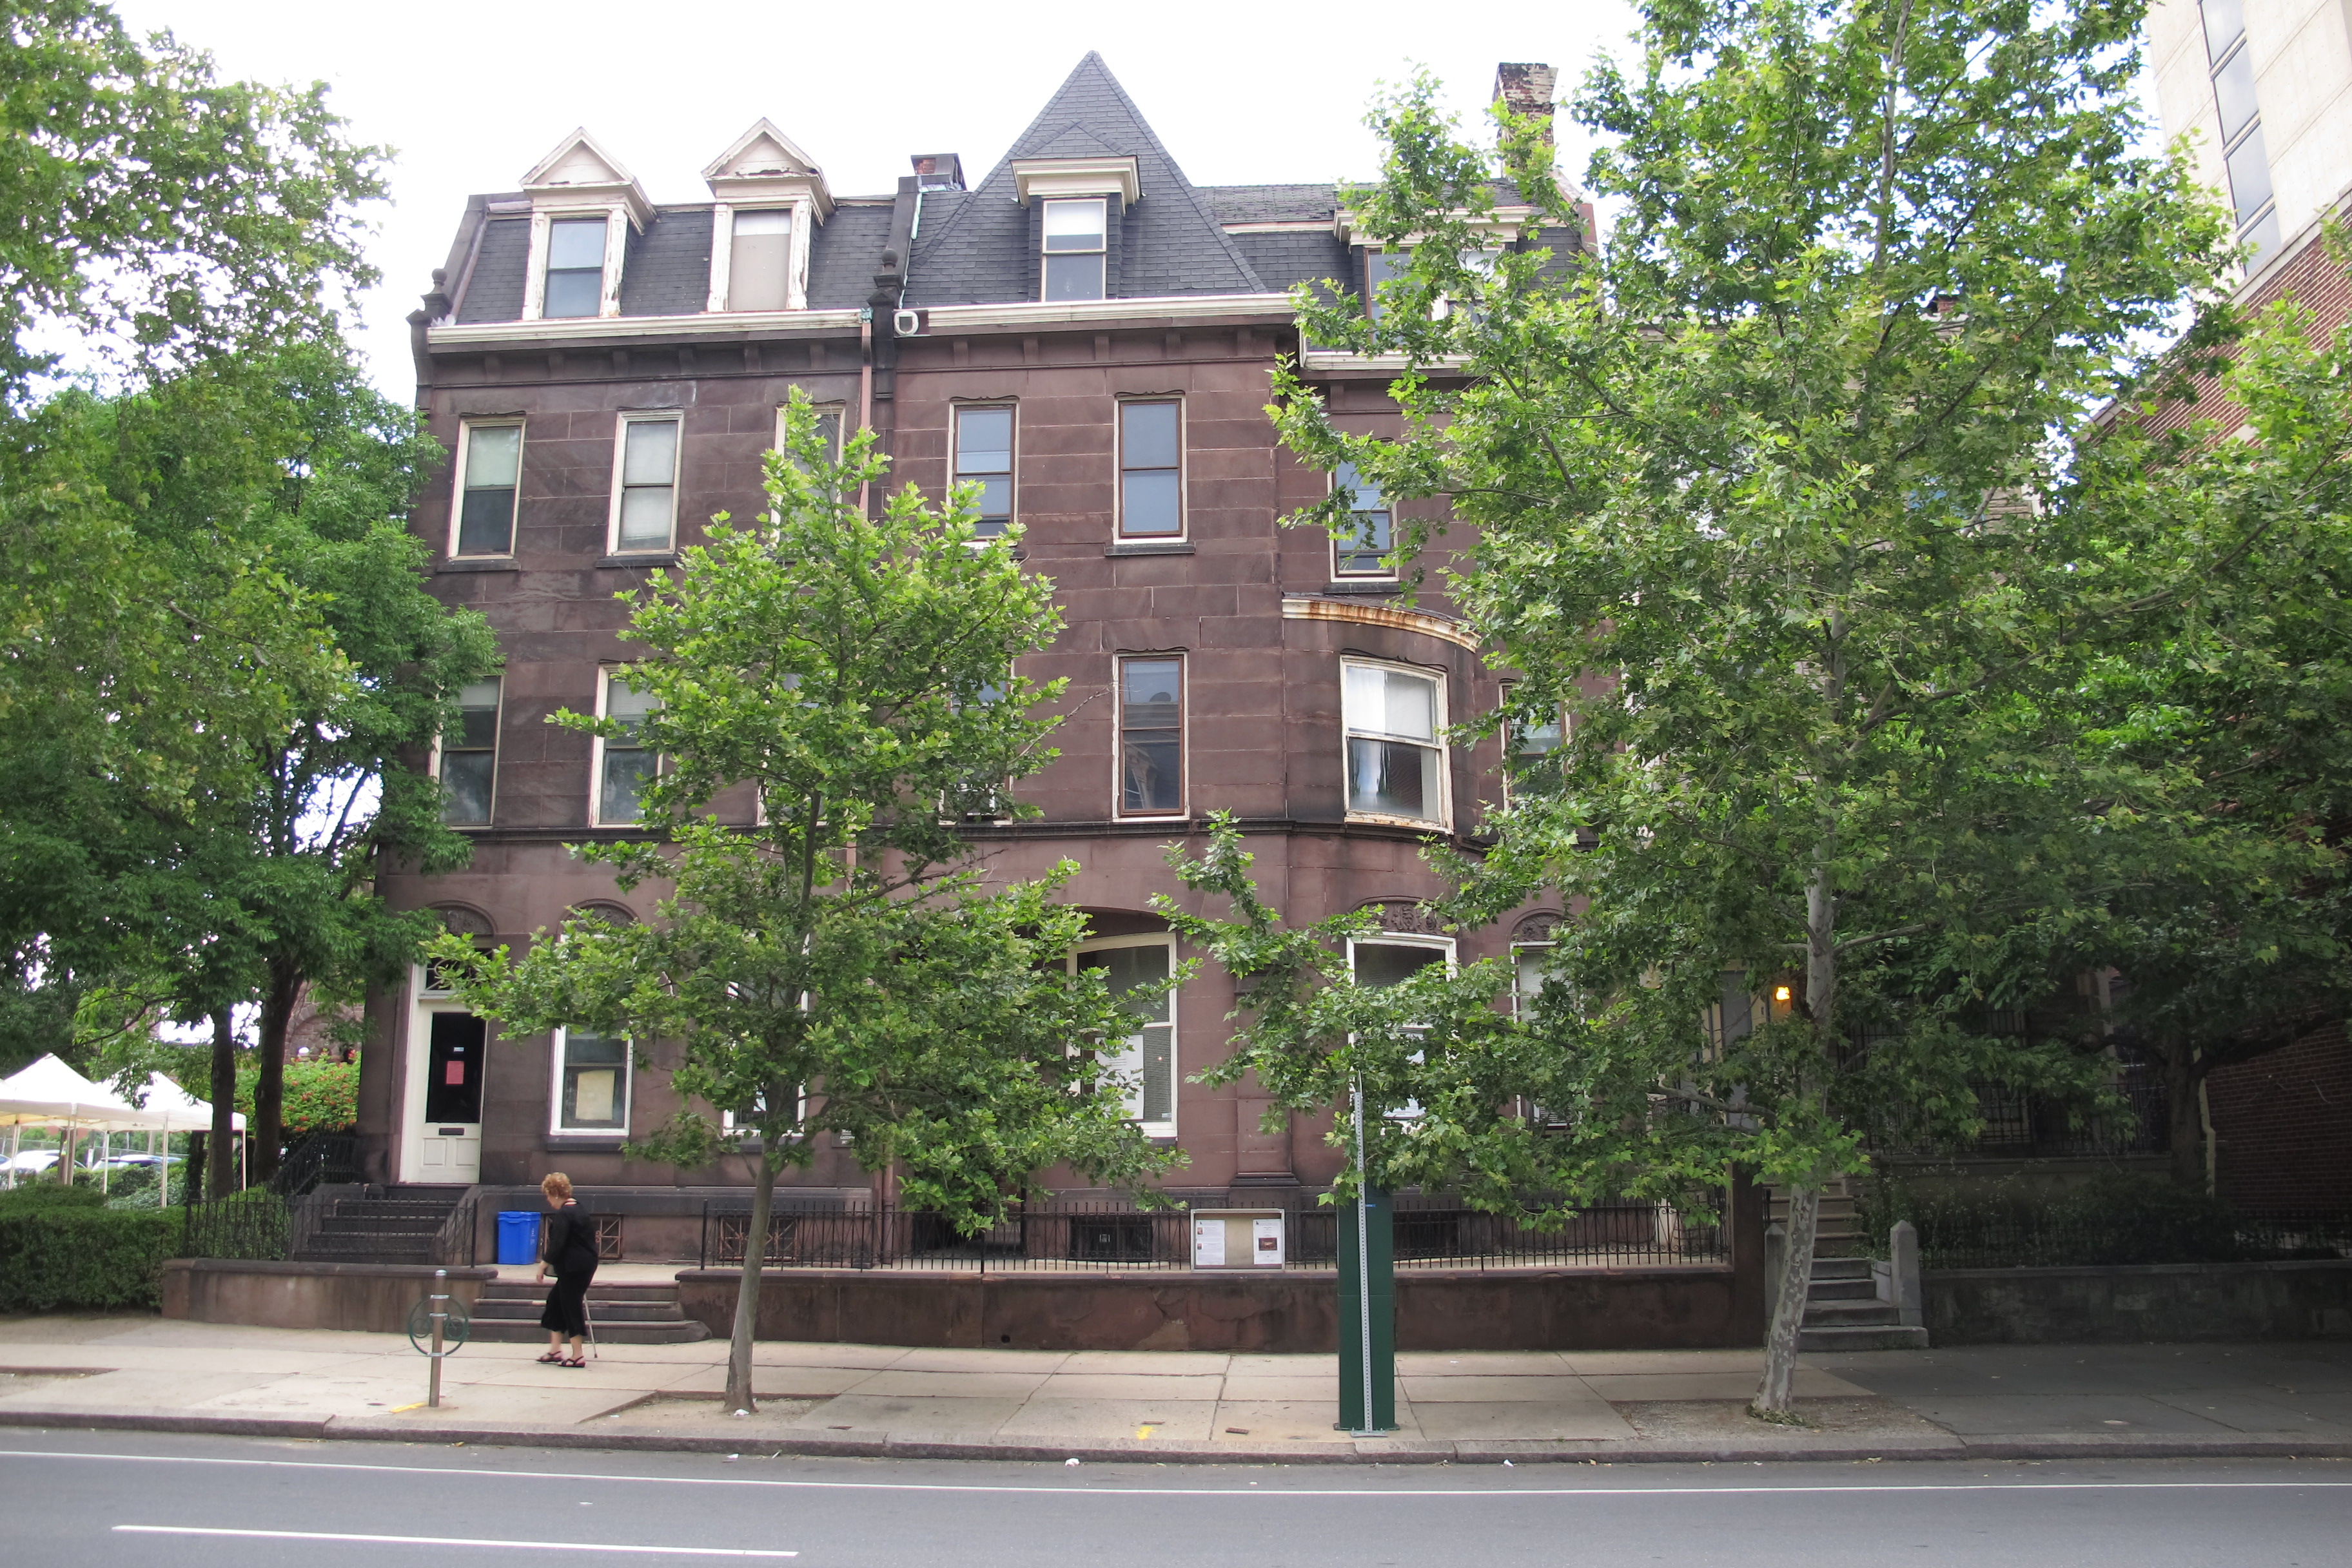 The Historical Commission approved demolition of these two historic brownstones on the 3700 block of Chestnut Street to make way for a residential tower to be built by the Episcopal Cathedral.